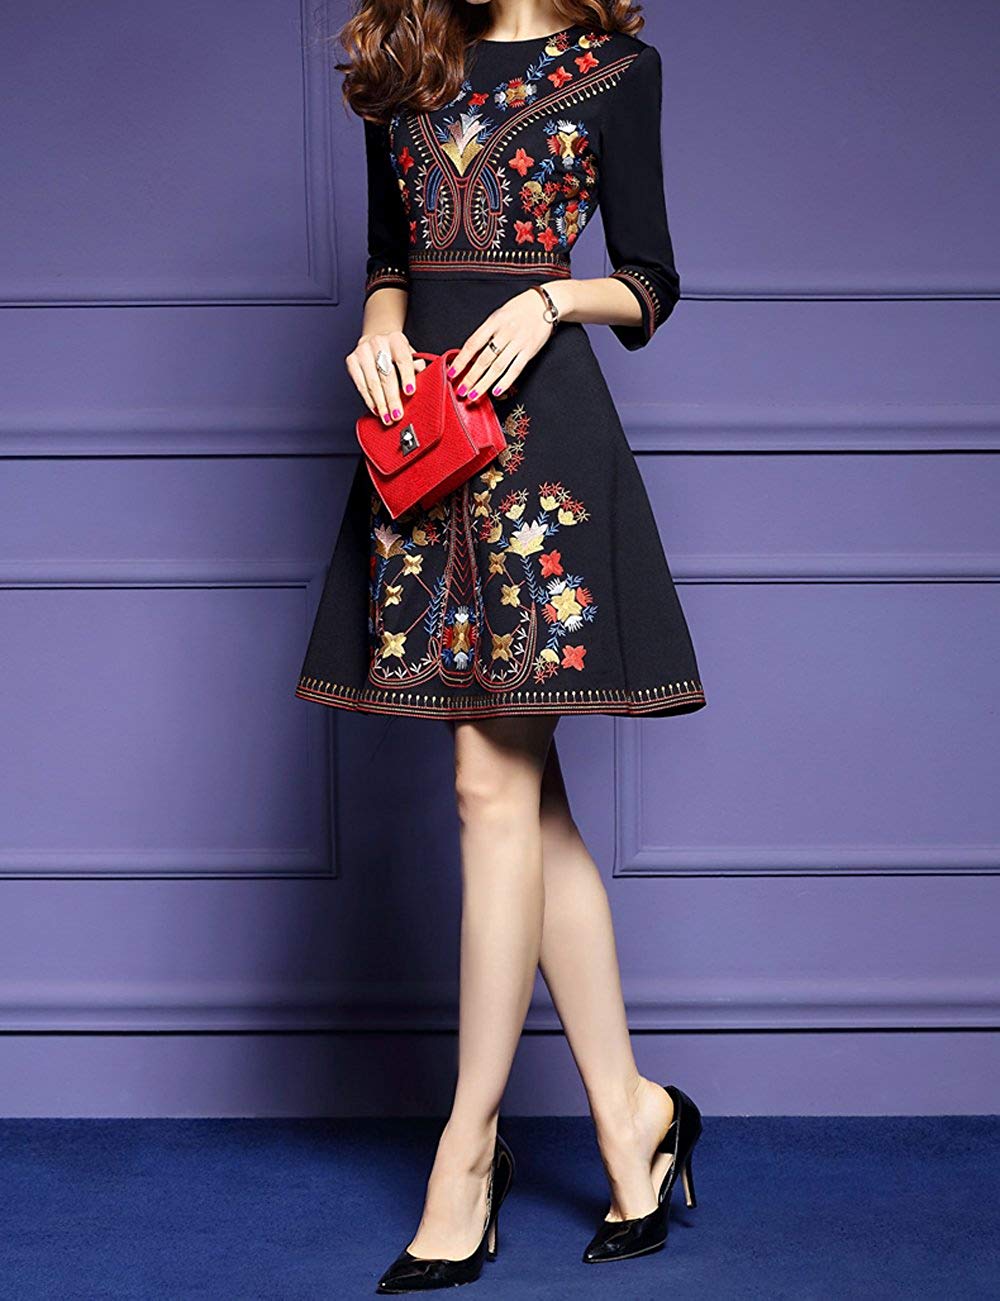 Women's Embroidered Floral Round Neck Cocktail Midi Dress - LAI MENG FIVE CATS